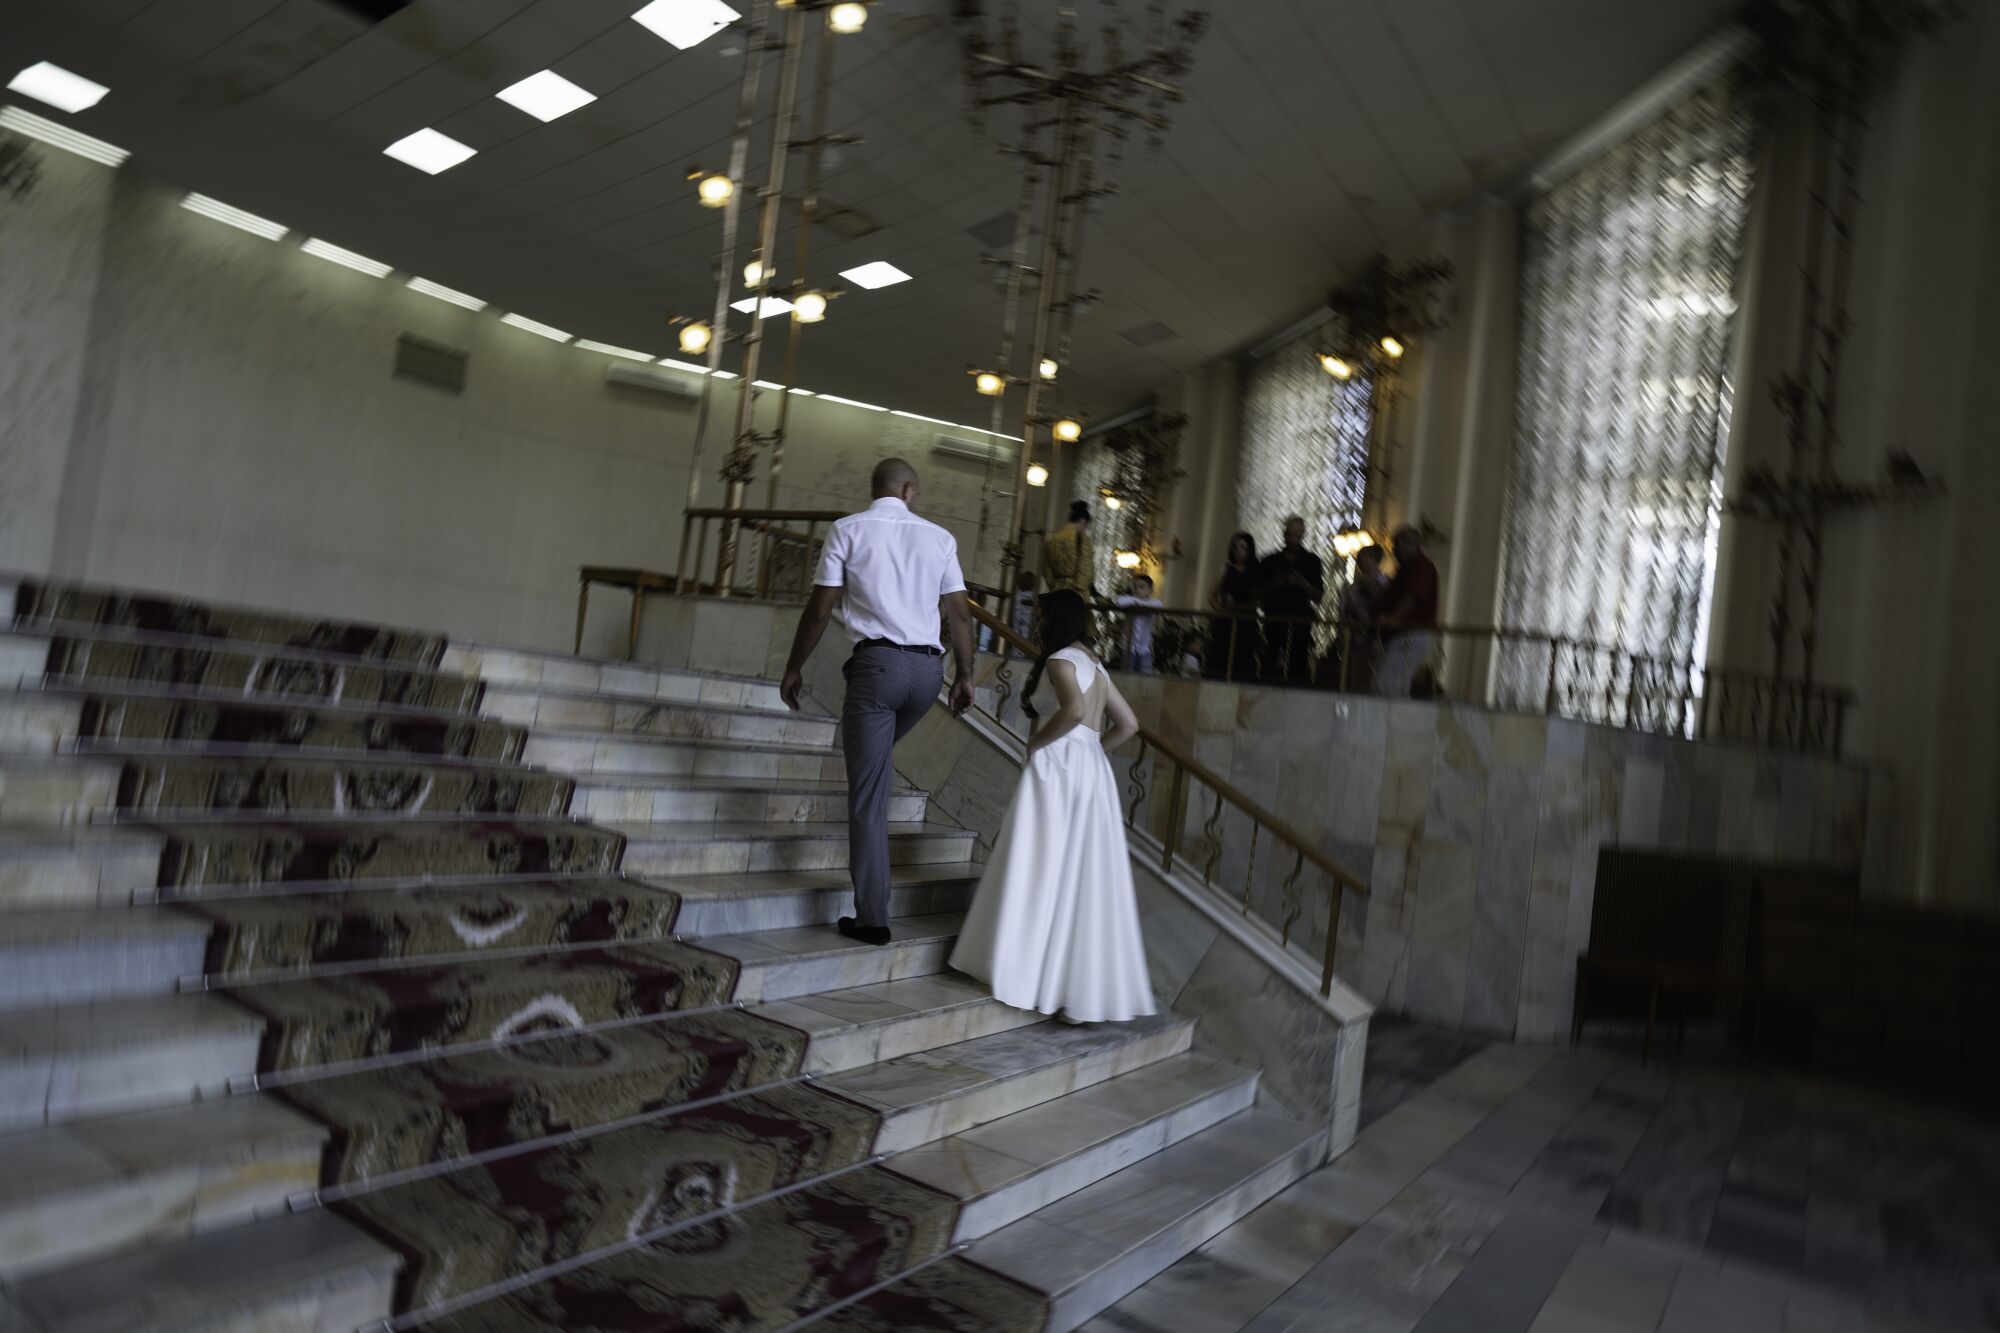 A couple climbs a staircase to get married at the registry office